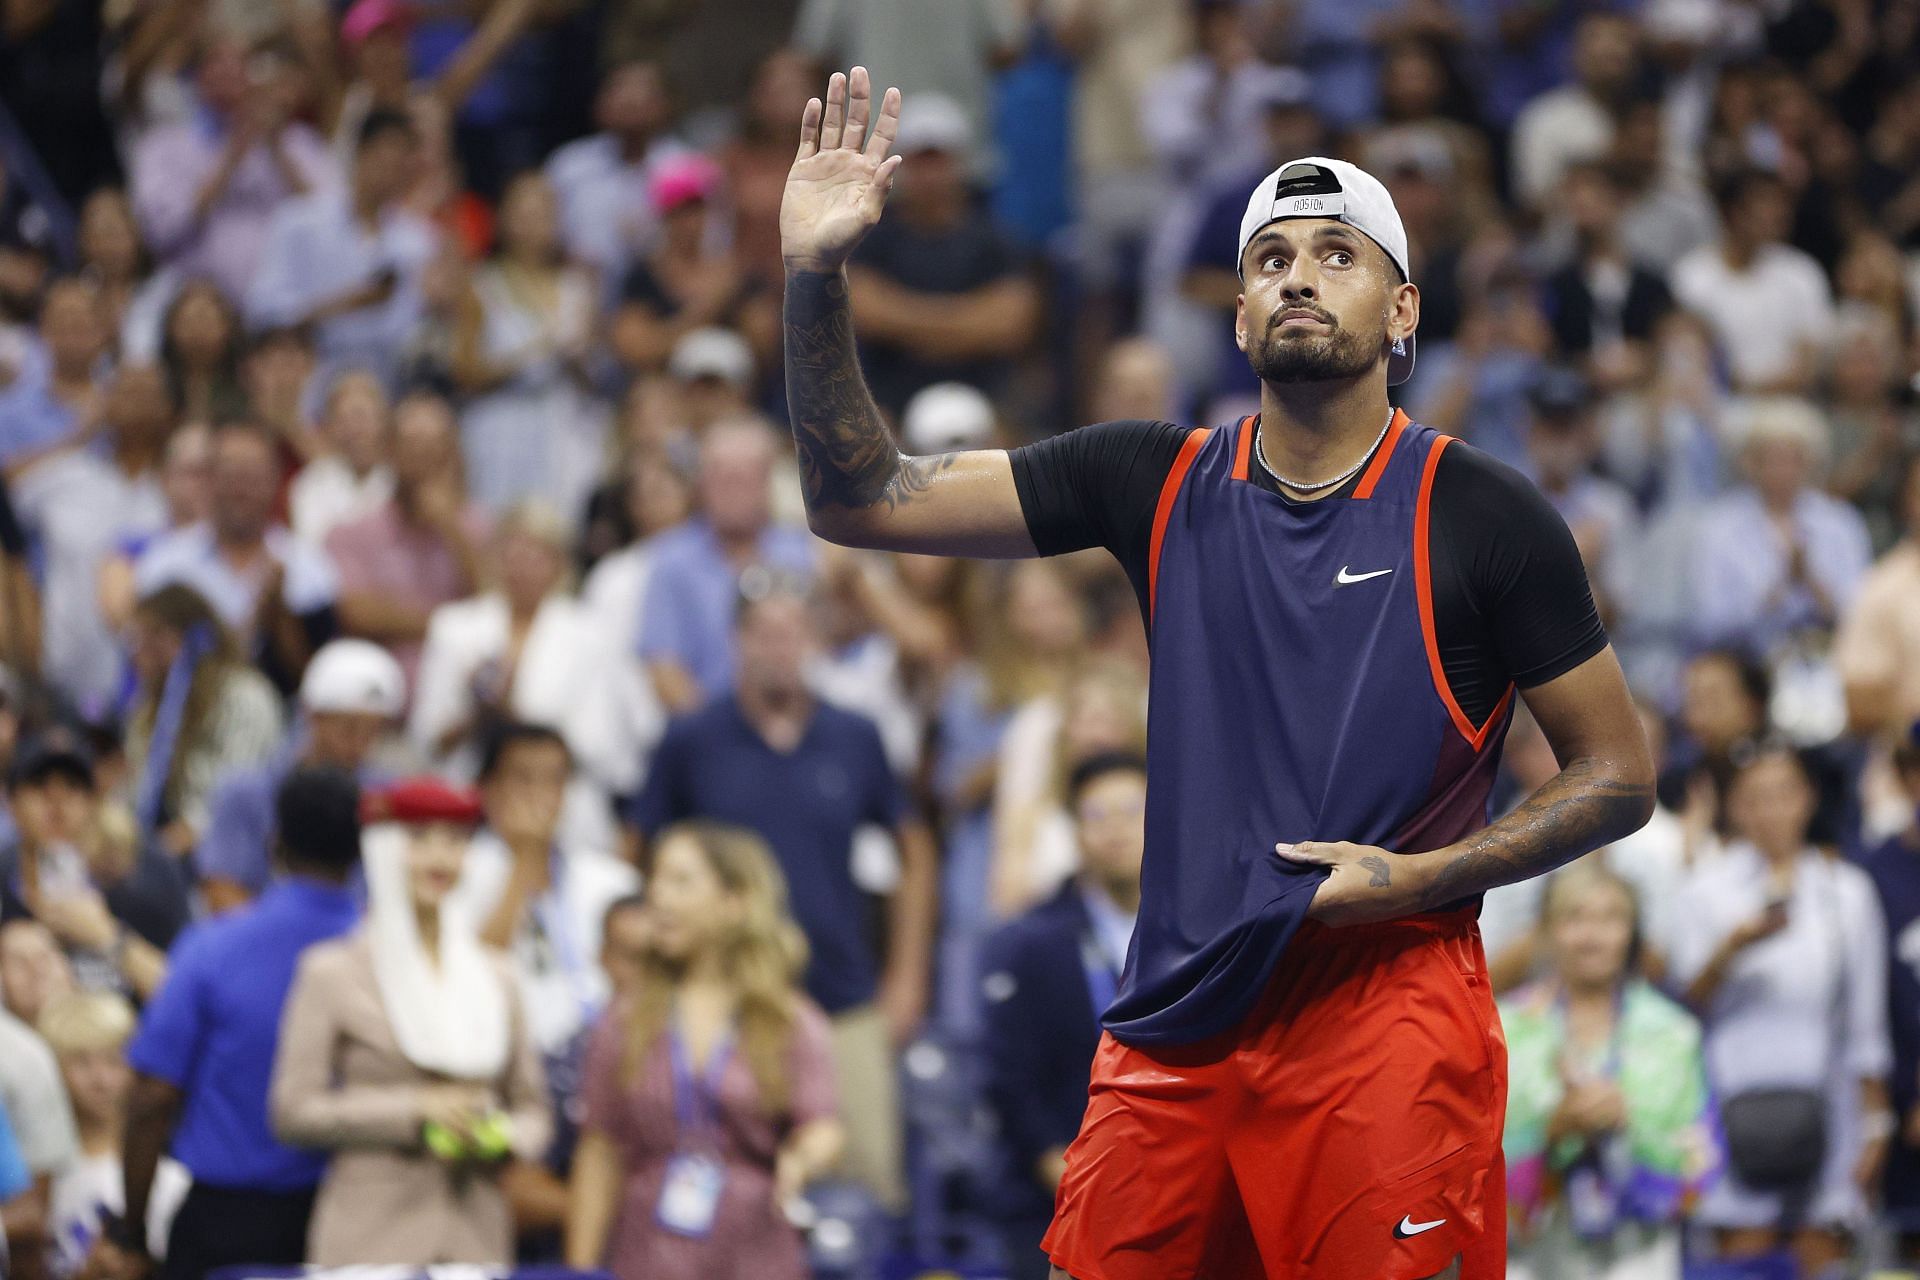 Nick Kyrgios of Australia celebrates a win against Daniil Medvedev at the 2022 US Open